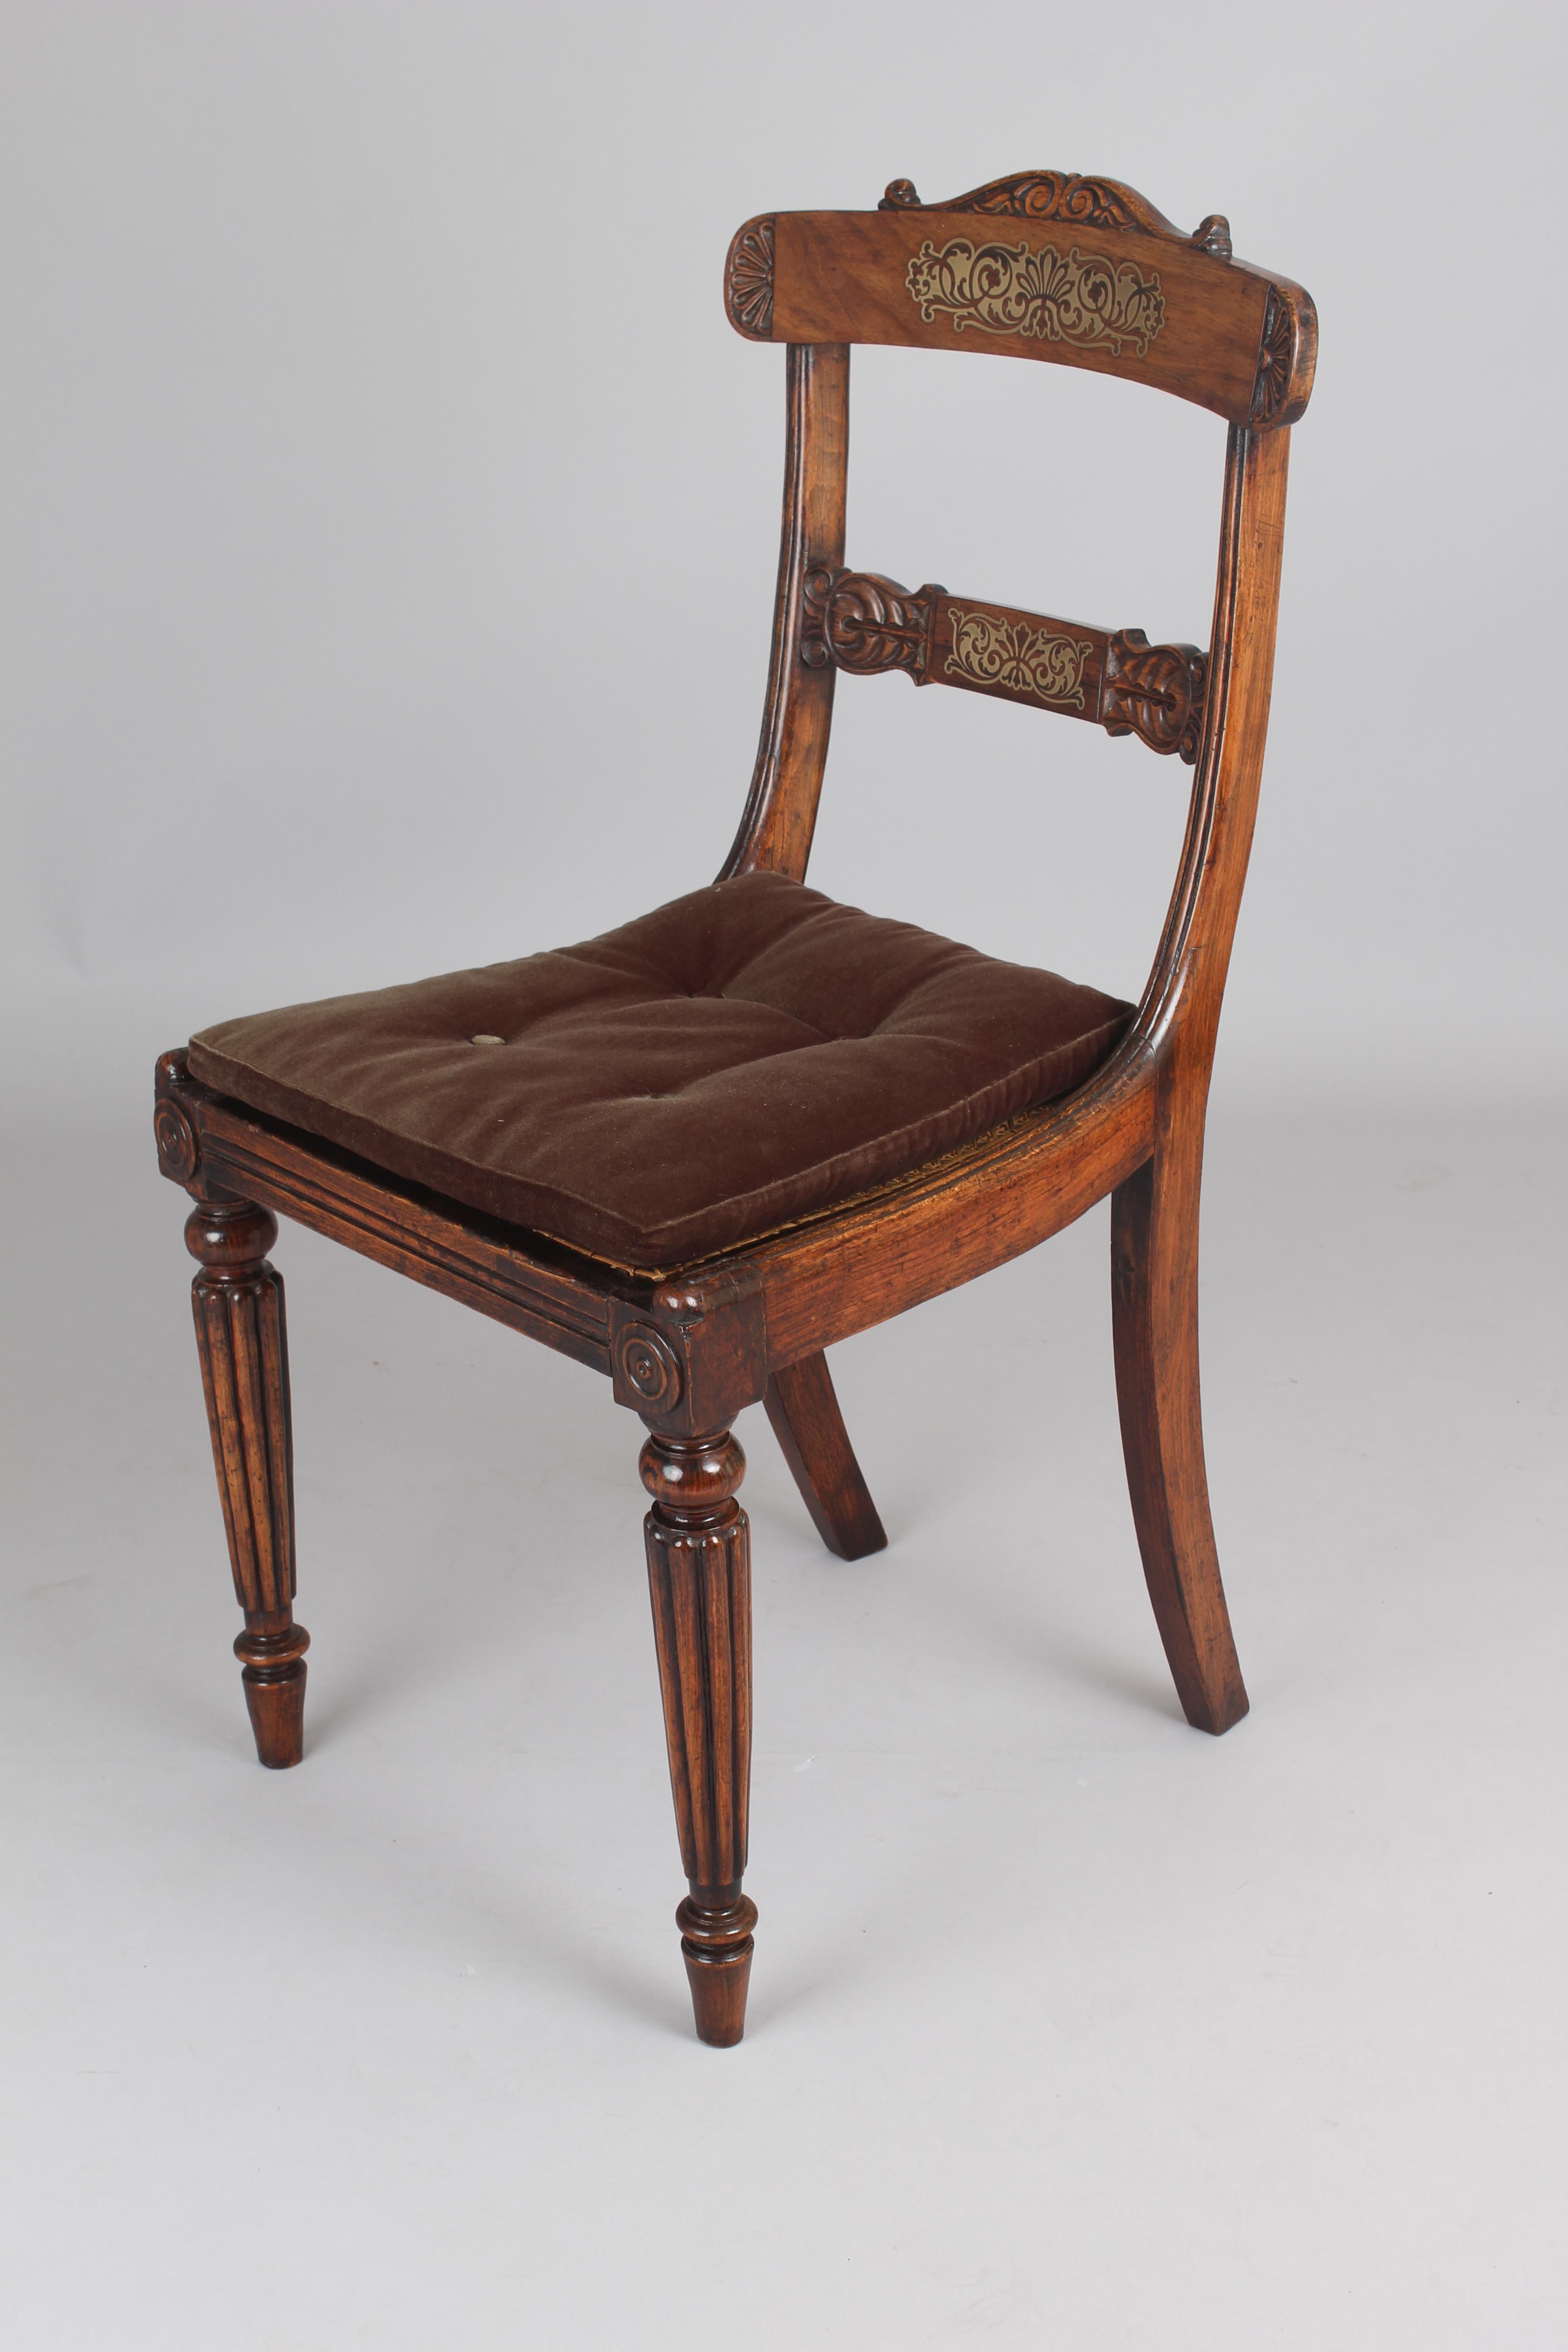 Set of Eight Regency Period Simulated Rosewood and Brass Inlaid Chairs im Zustand „Gut“ im Angebot in Cambridge, GB